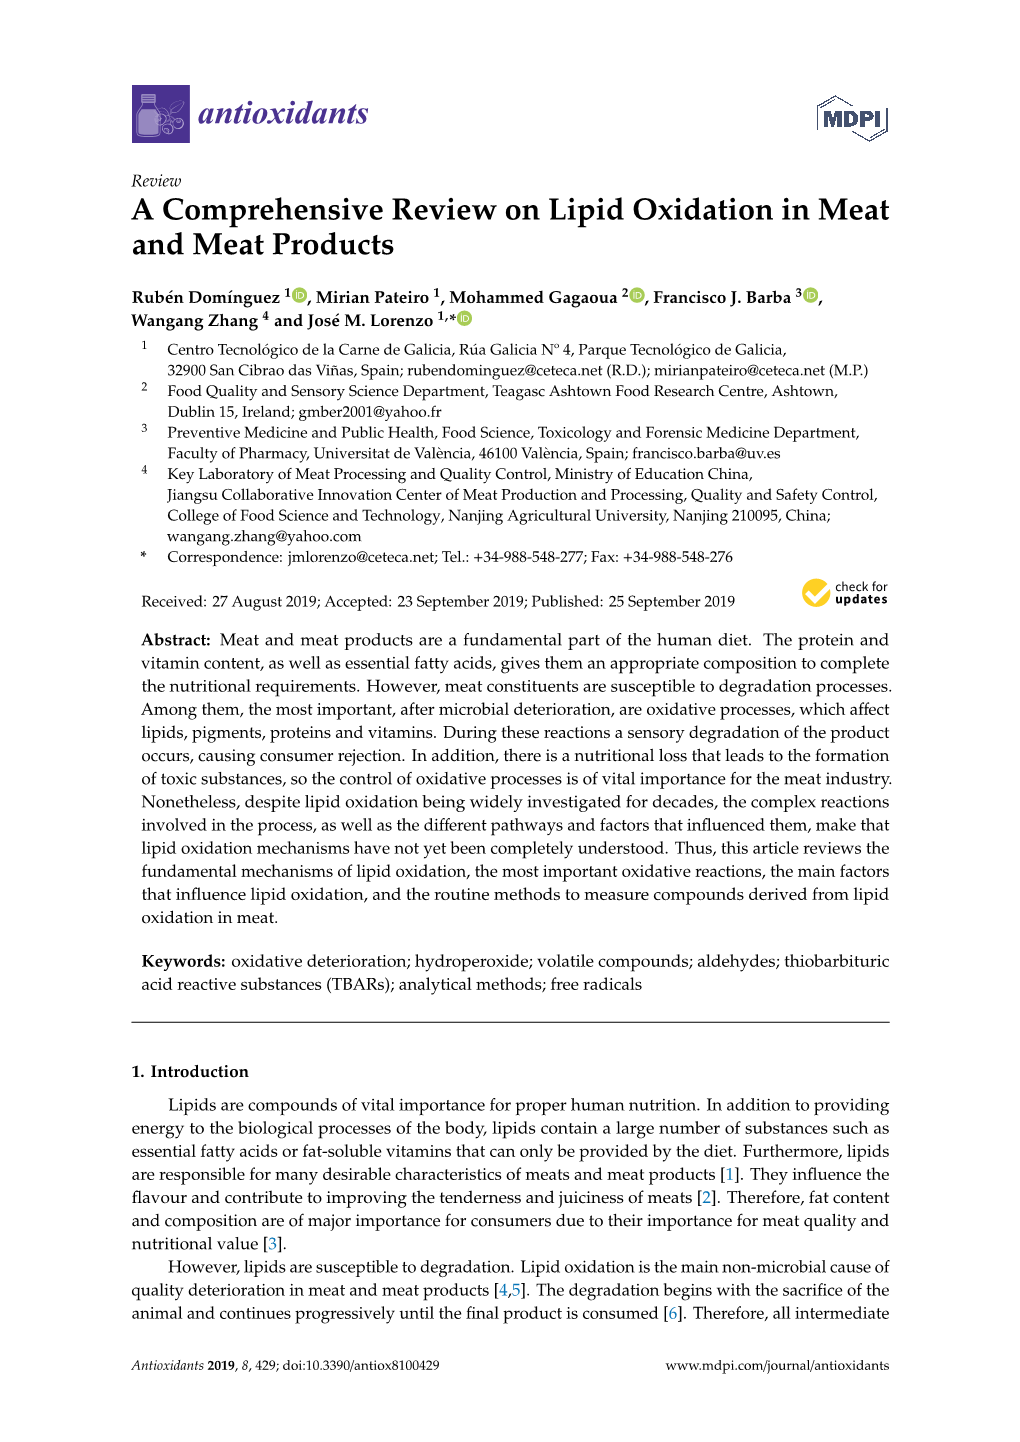 A Comprehensive Review on Lipid Oxidation in Meat and Meat Products